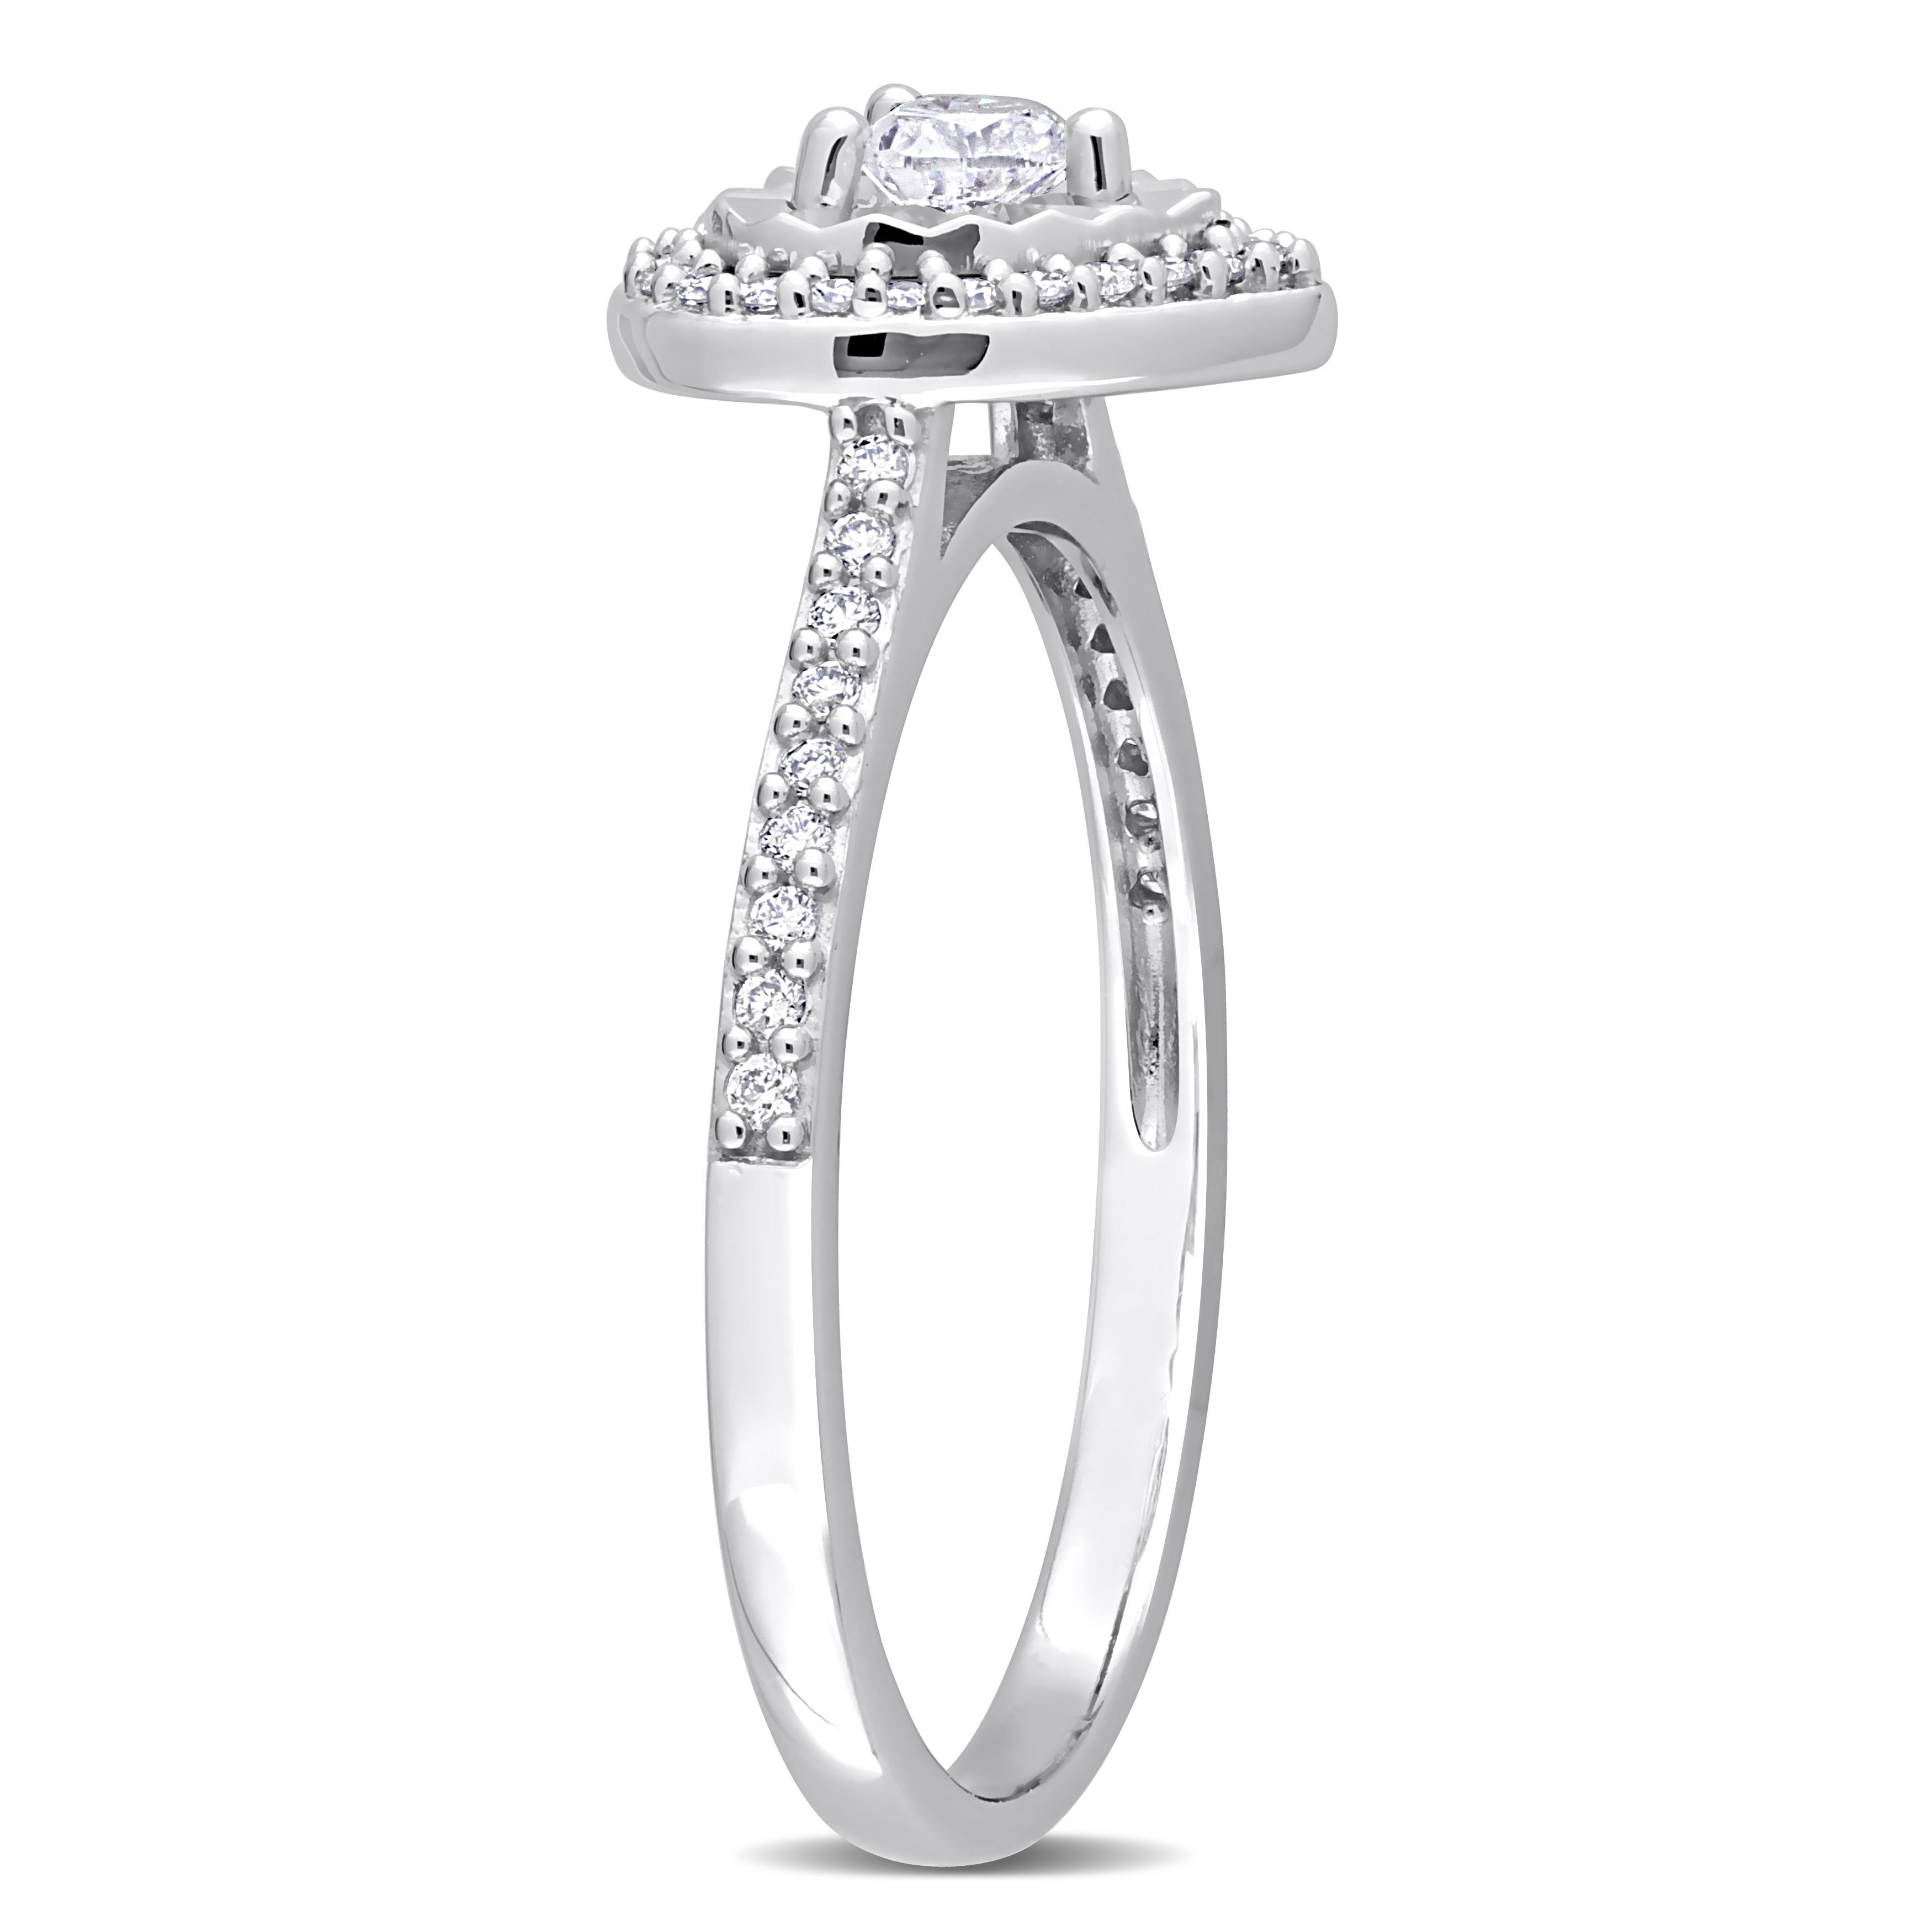 1/3 CT TW Heart & Round Shape Diamond Halo Engagement Ring in 14k White Gold